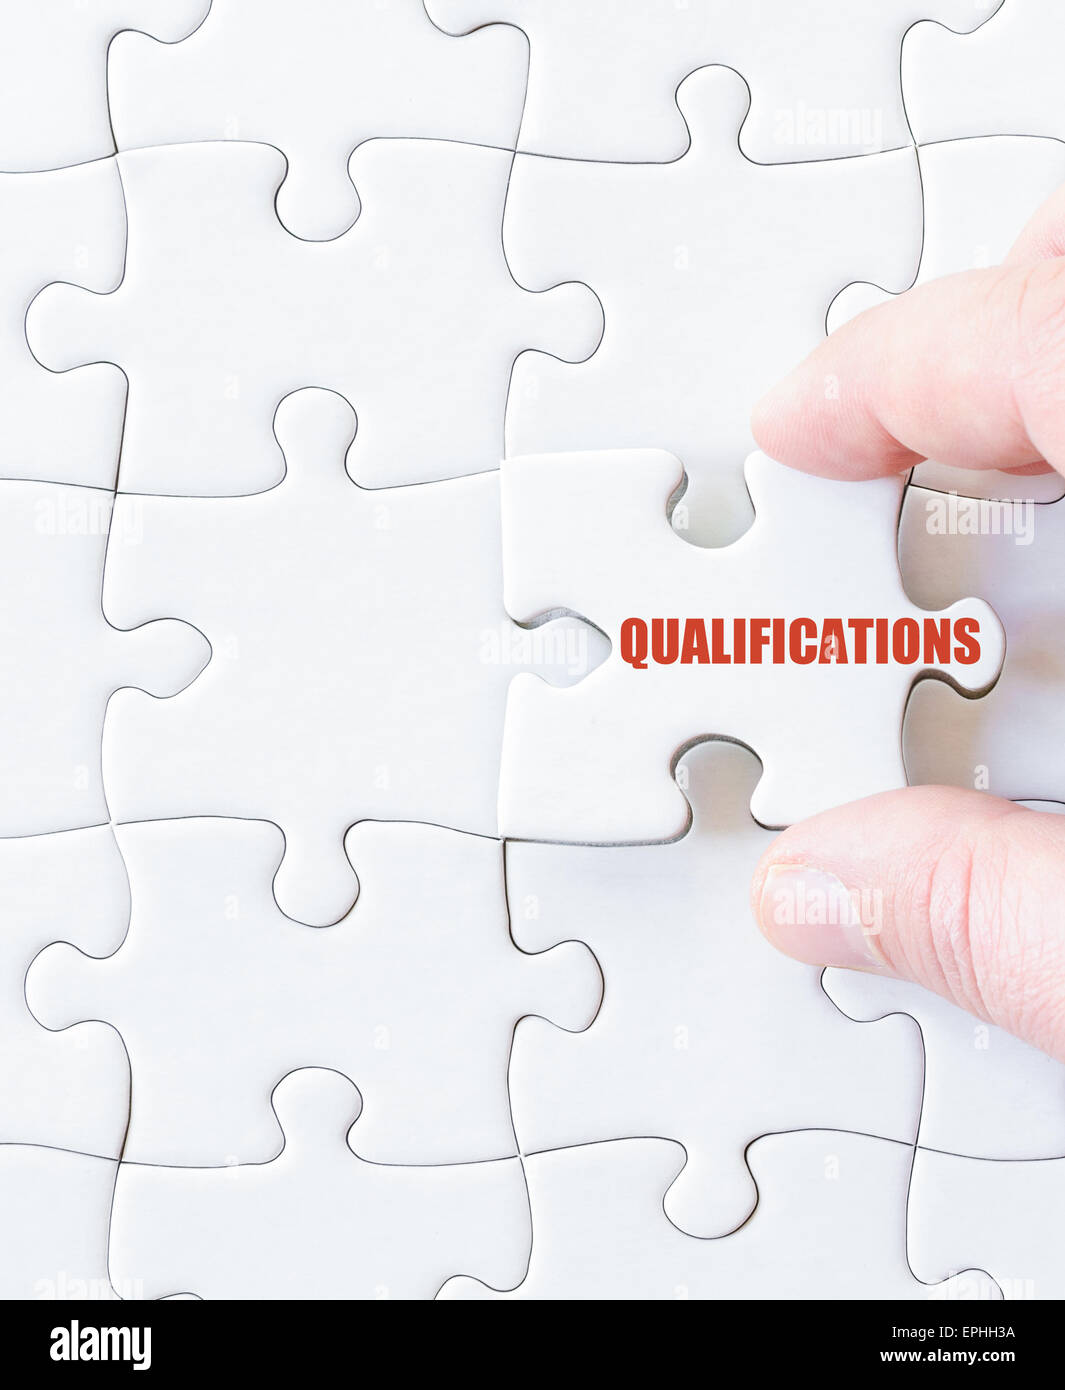 Missing jigsaw puzzle piece with word  QUALIFICATIONS. Business concept image for completing the puzzle. Stock Photo